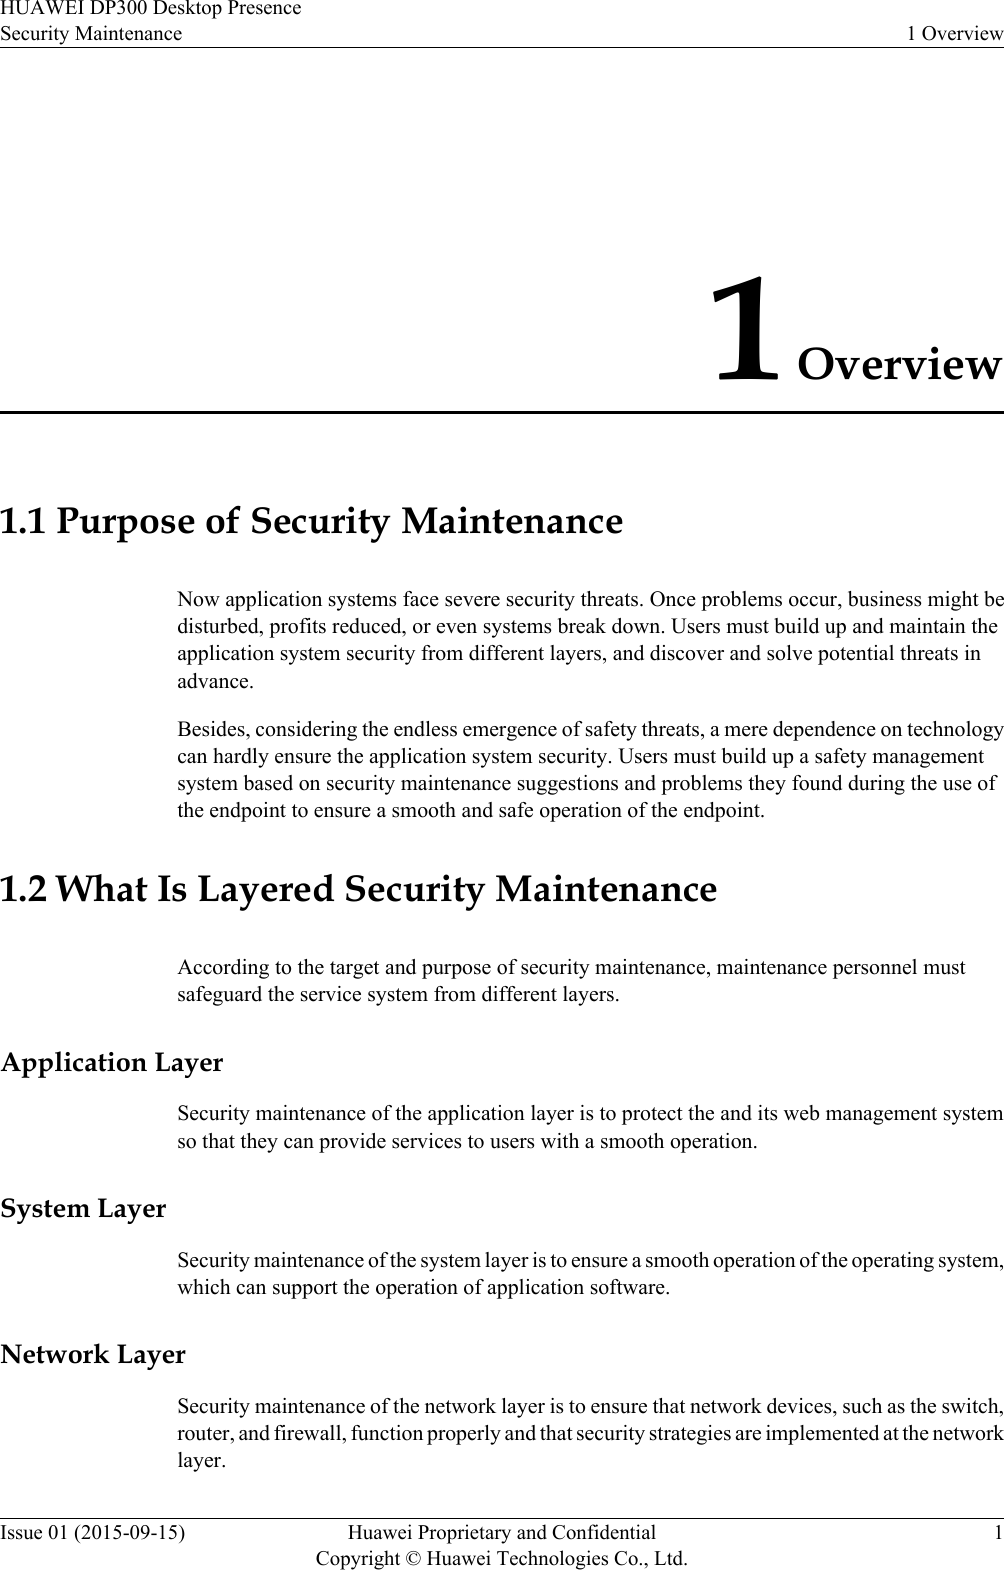 1 Overview1.1 Purpose of Security MaintenanceNow application systems face severe security threats. Once problems occur, business might bedisturbed, profits reduced, or even systems break down. Users must build up and maintain theapplication system security from different layers, and discover and solve potential threats inadvance.Besides, considering the endless emergence of safety threats, a mere dependence on technologycan hardly ensure the application system security. Users must build up a safety managementsystem based on security maintenance suggestions and problems they found during the use ofthe endpoint to ensure a smooth and safe operation of the endpoint.1.2 What Is Layered Security MaintenanceAccording to the target and purpose of security maintenance, maintenance personnel mustsafeguard the service system from different layers.Application LayerSecurity maintenance of the application layer is to protect the and its web management systemso that they can provide services to users with a smooth operation.System LayerSecurity maintenance of the system layer is to ensure a smooth operation of the operating system,which can support the operation of application software.Network LayerSecurity maintenance of the network layer is to ensure that network devices, such as the switch,router, and firewall, function properly and that security strategies are implemented at the networklayer.HUAWEI DP300 Desktop PresenceSecurity Maintenance 1 OverviewIssue 01 (2015-09-15) Huawei Proprietary and ConfidentialCopyright © Huawei Technologies Co., Ltd.1